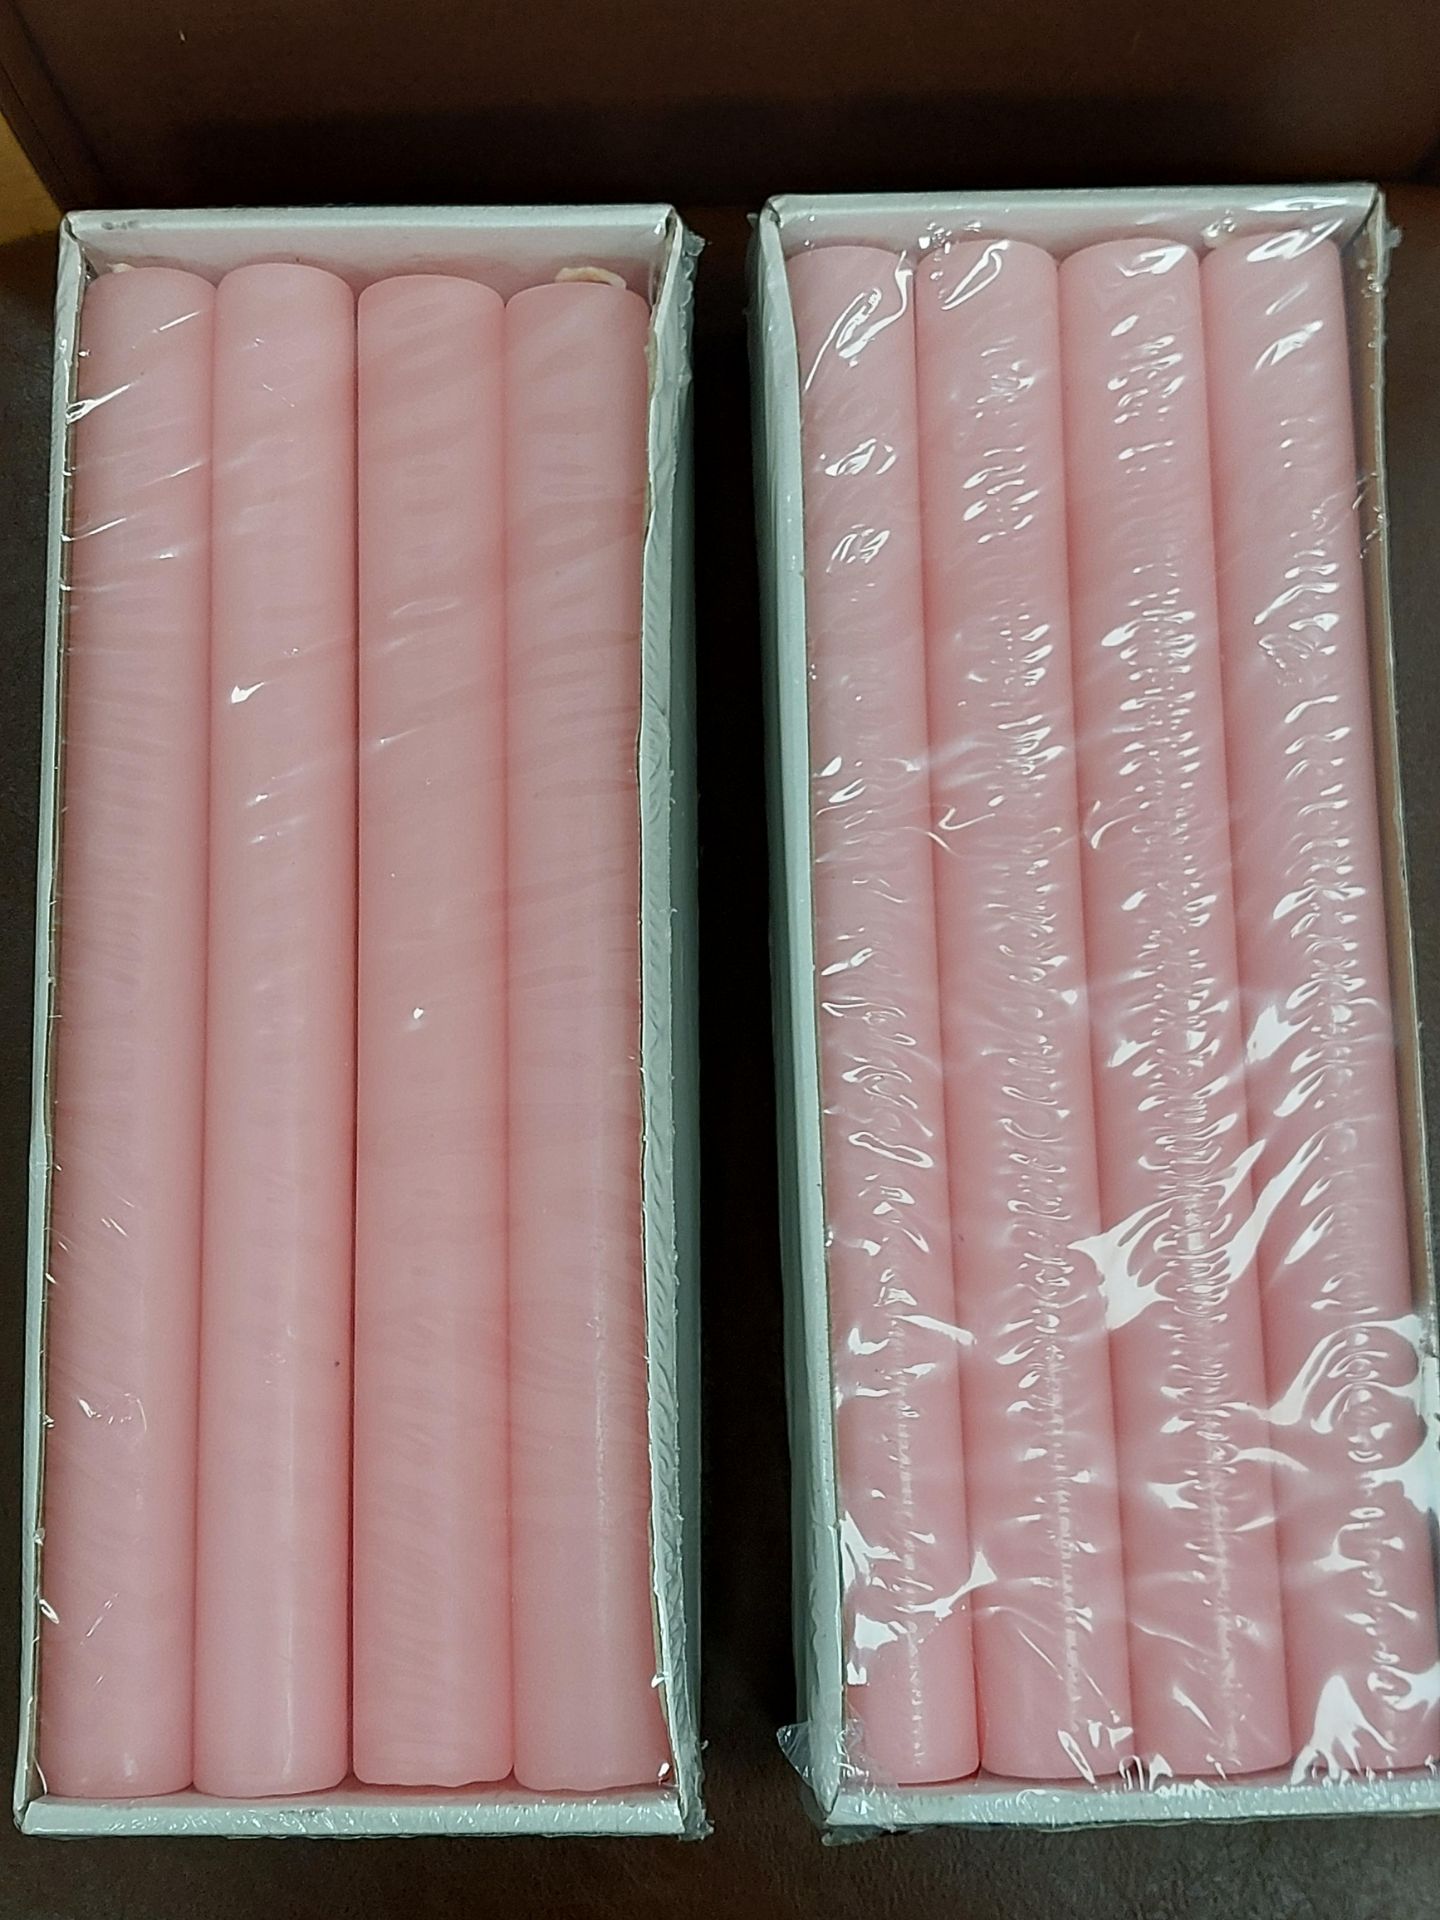 _arge pink candles 300 mm x 30 mm. 2 boxes